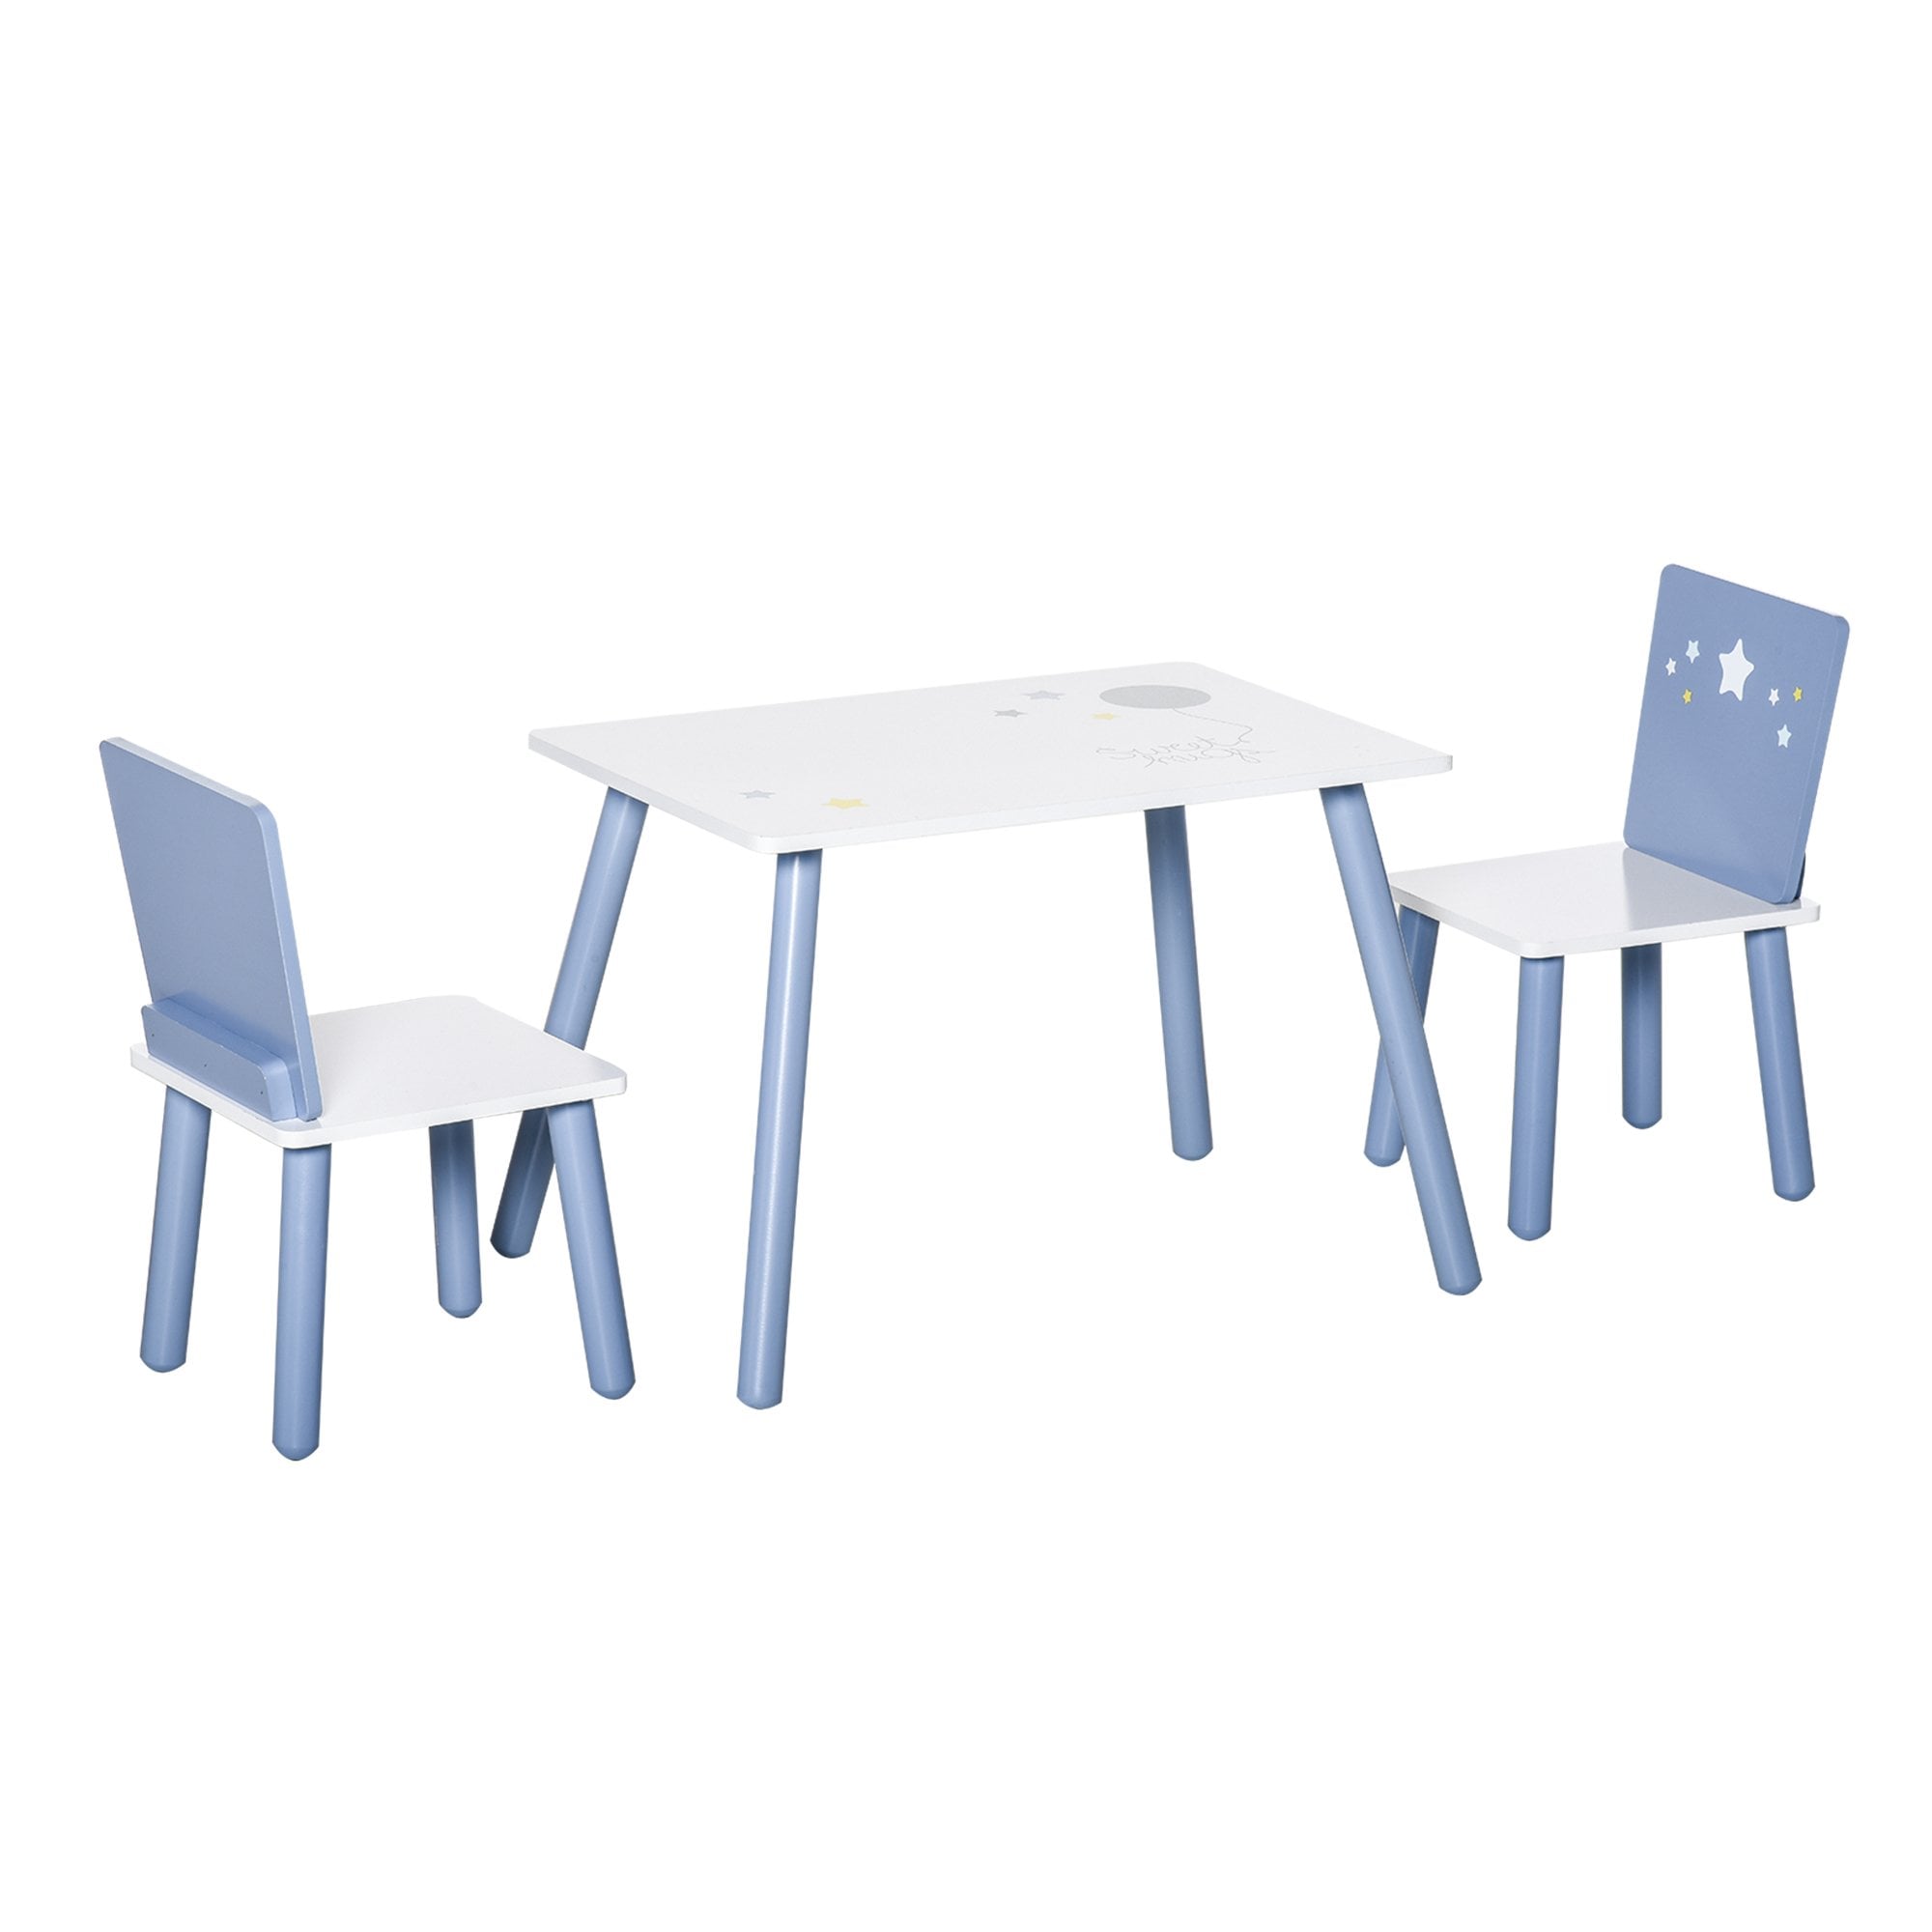 Kids Table and Chairs Set 3 Pieces 1 Table 2 Chairs Toddler Wooden Multi-usage Easy Assembly Star Image Ornament Blue and White Pcs  | TJ Hughes